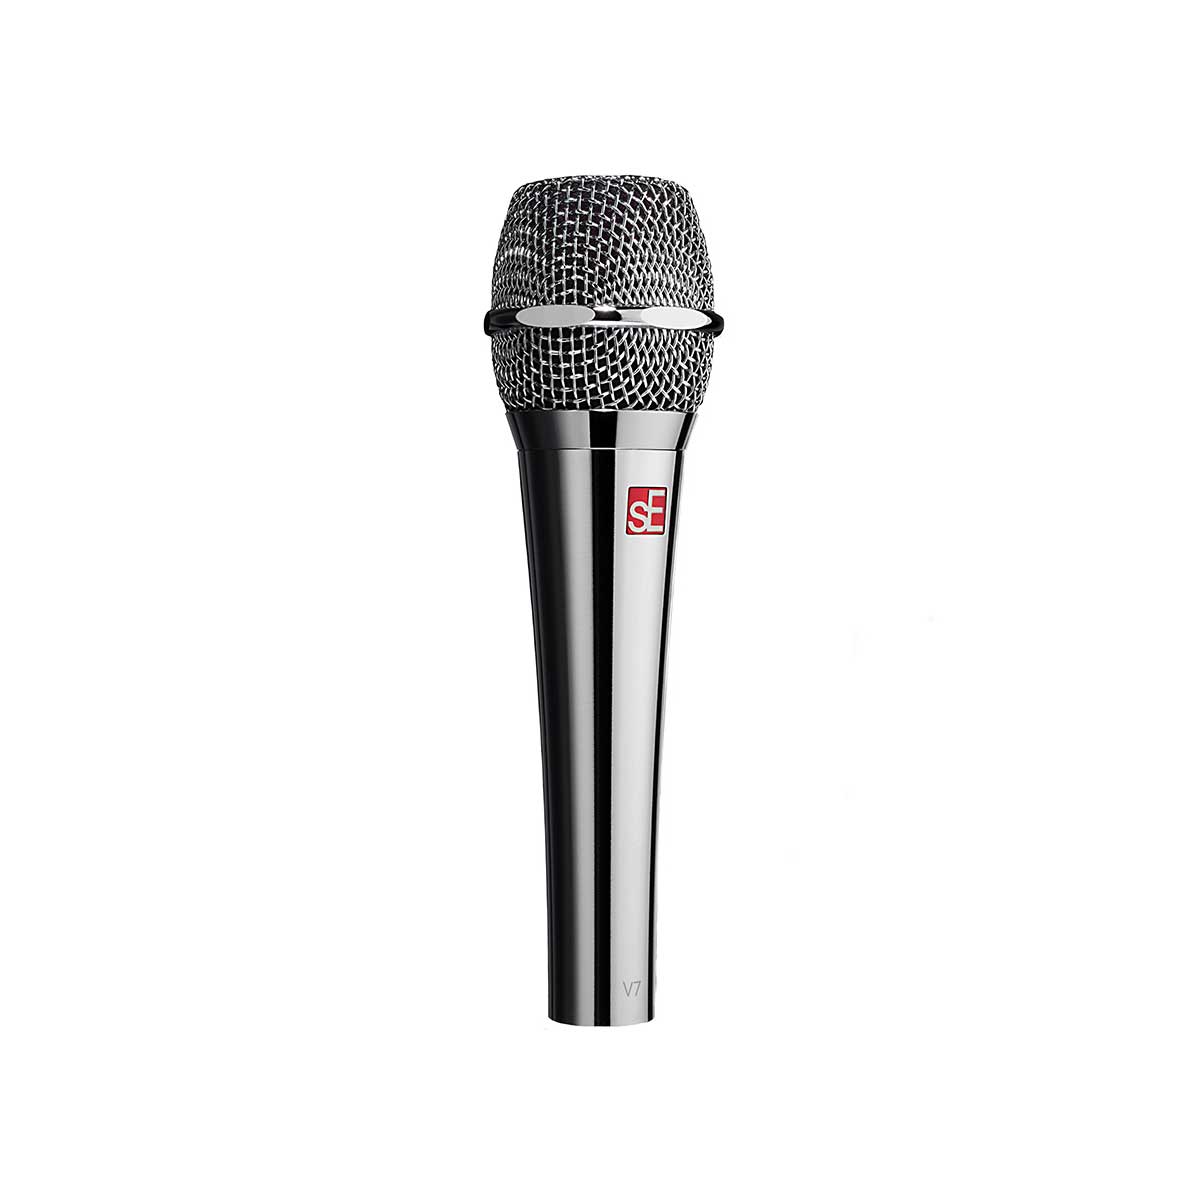 sE Electronics V7 Supercardioid Dynamic Vocal Microphone Chrome-­‐plated